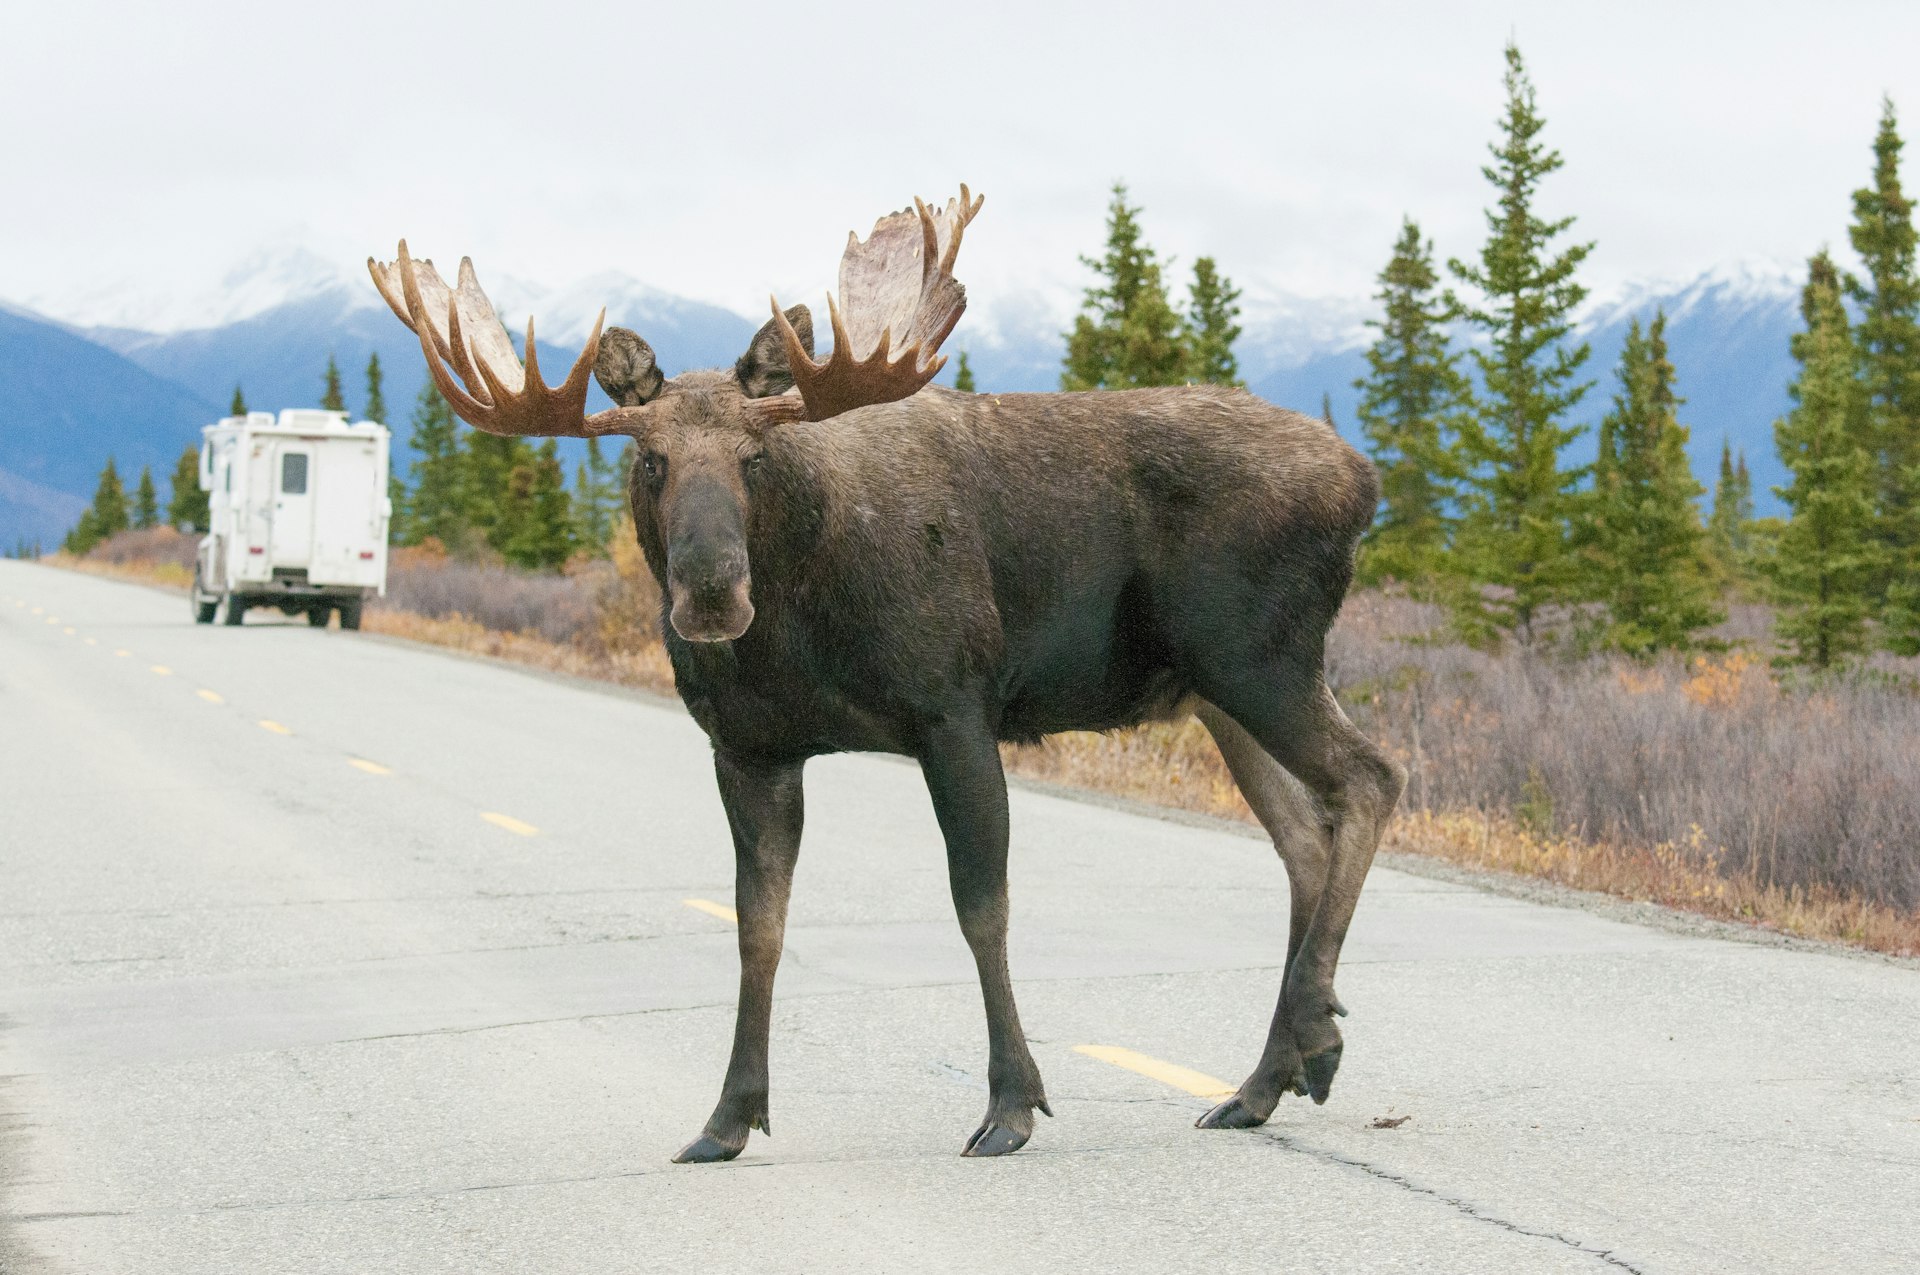 Bull Moose on the highway with tourist camper in the background, Denali National Park, Alaska